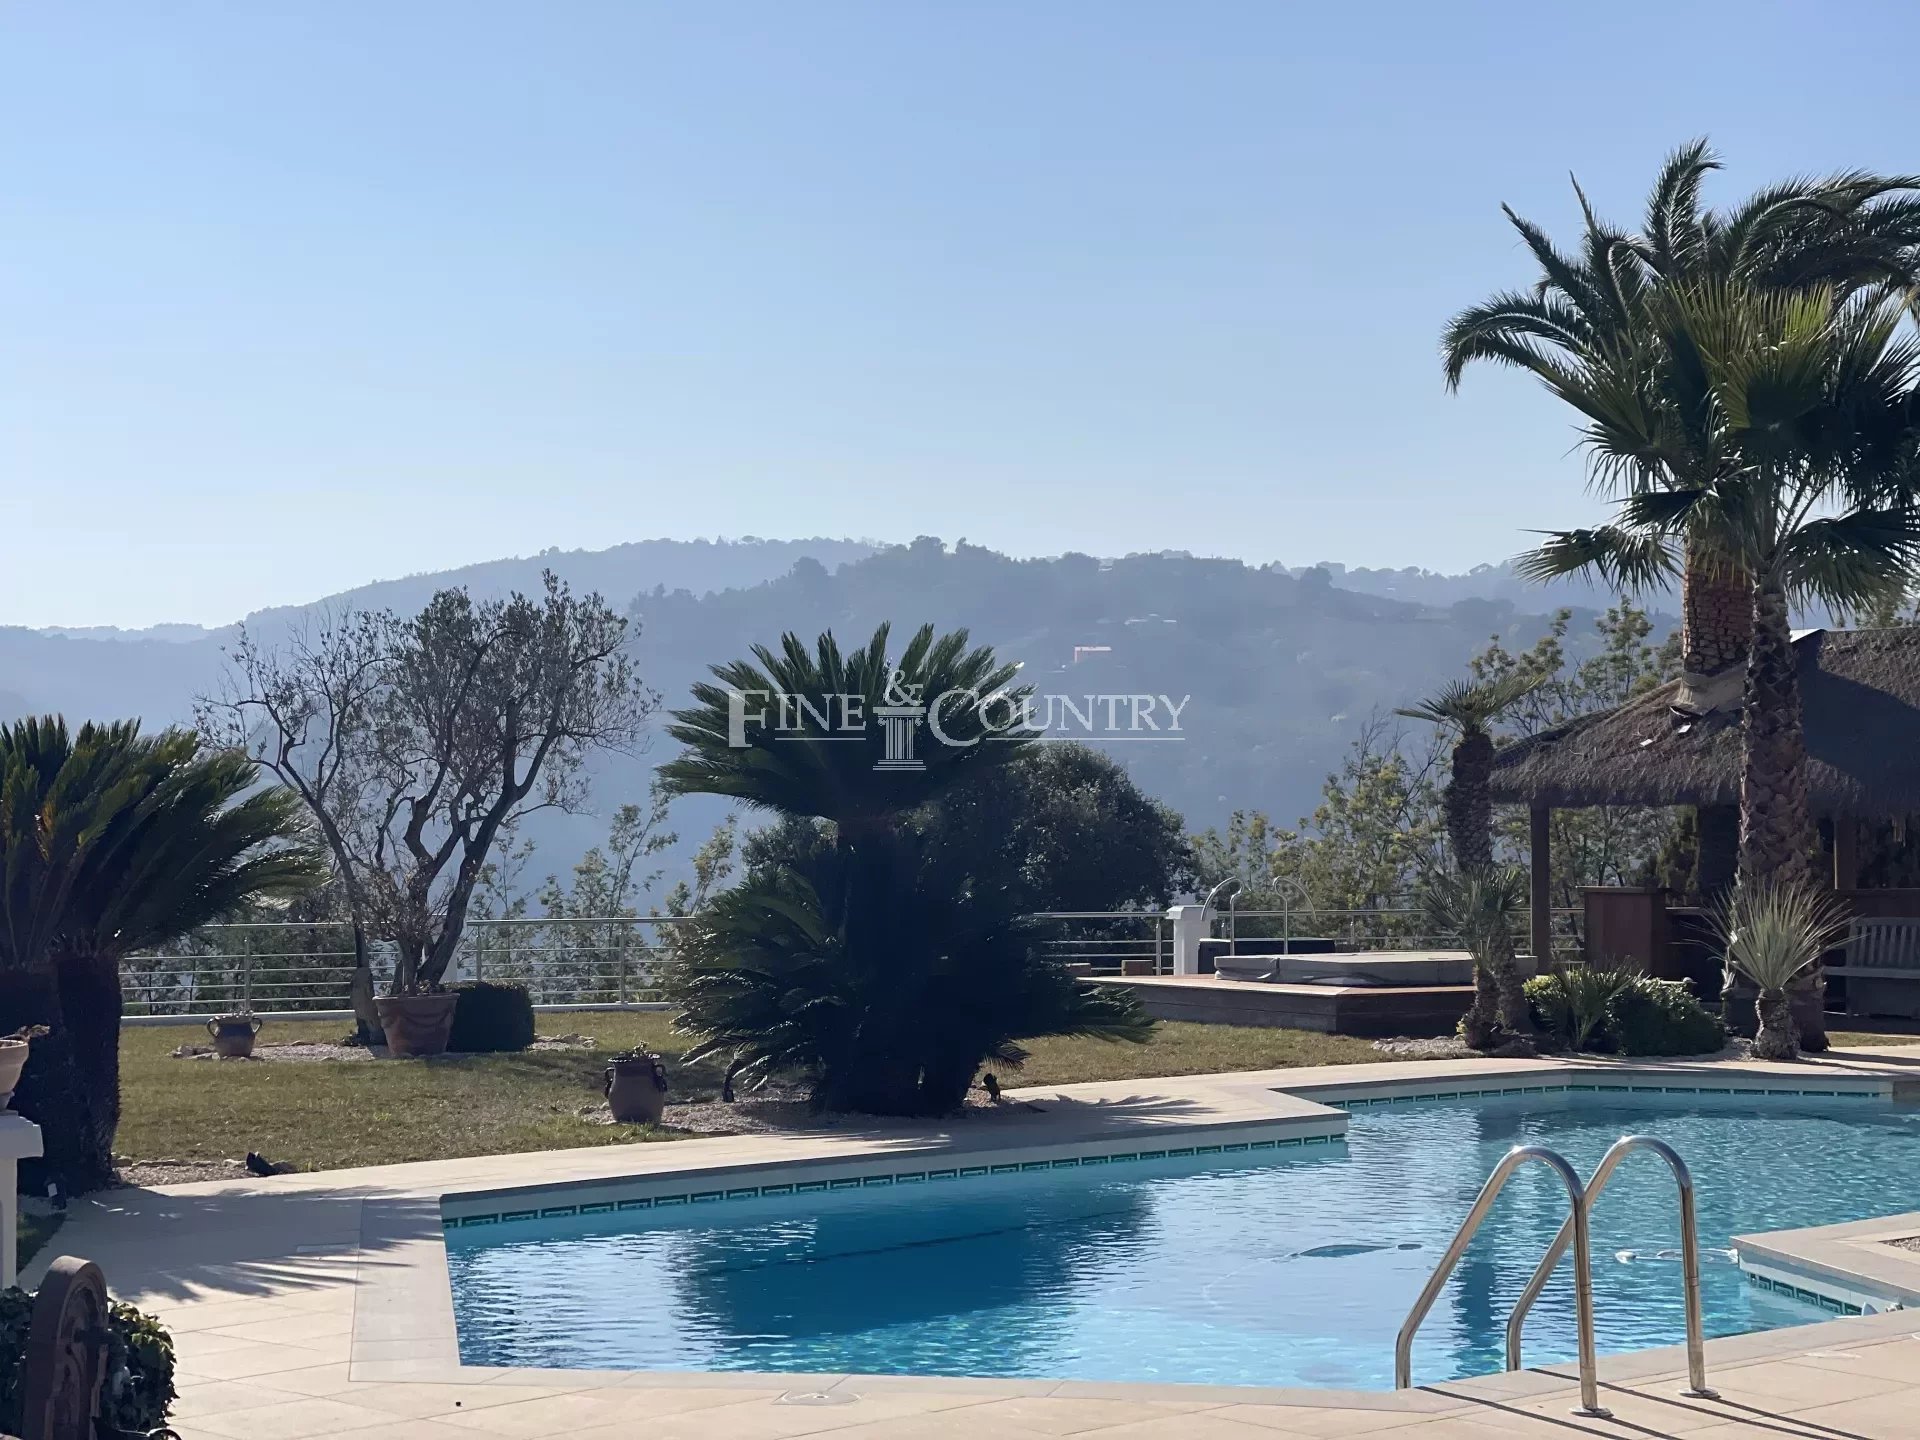 Magnificent panoramic views, villa for sale on the hills, Auribeau sur Siagne